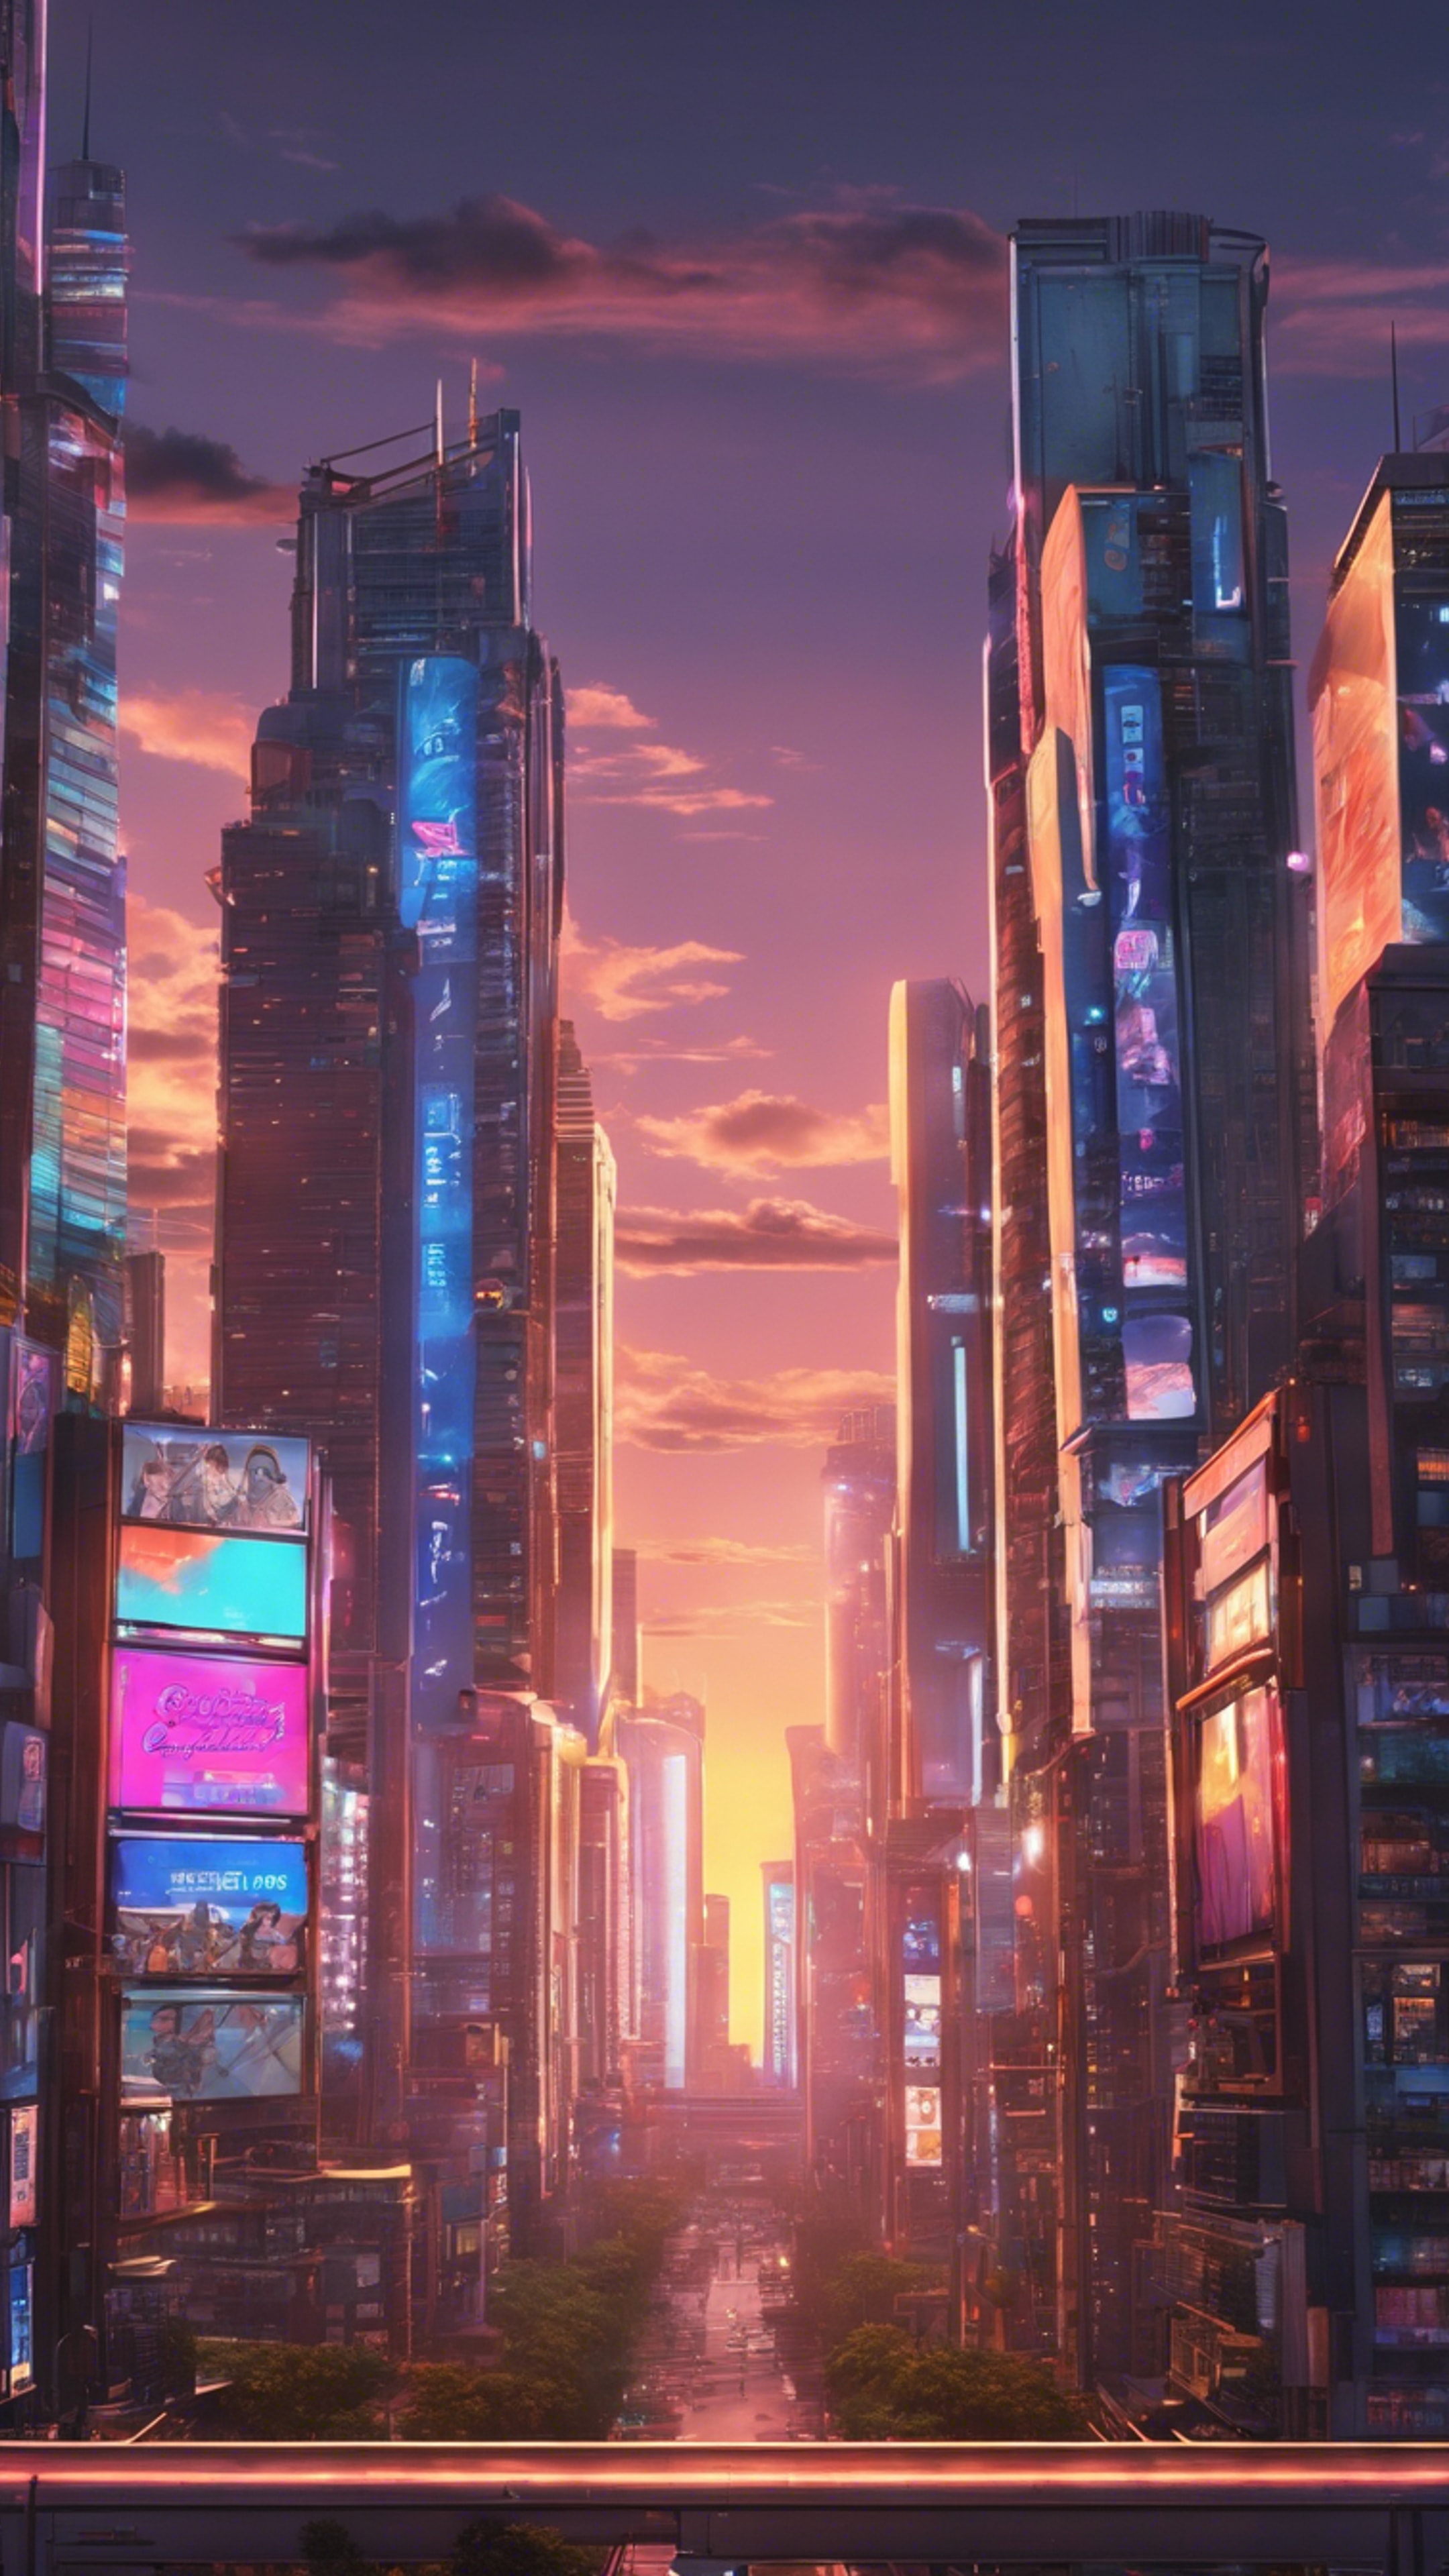 A cool anime-themed cityscape at sunset with towering skyscrapers and glowing neon billboards. Wallpaper[63ed83801d984cce89ed]